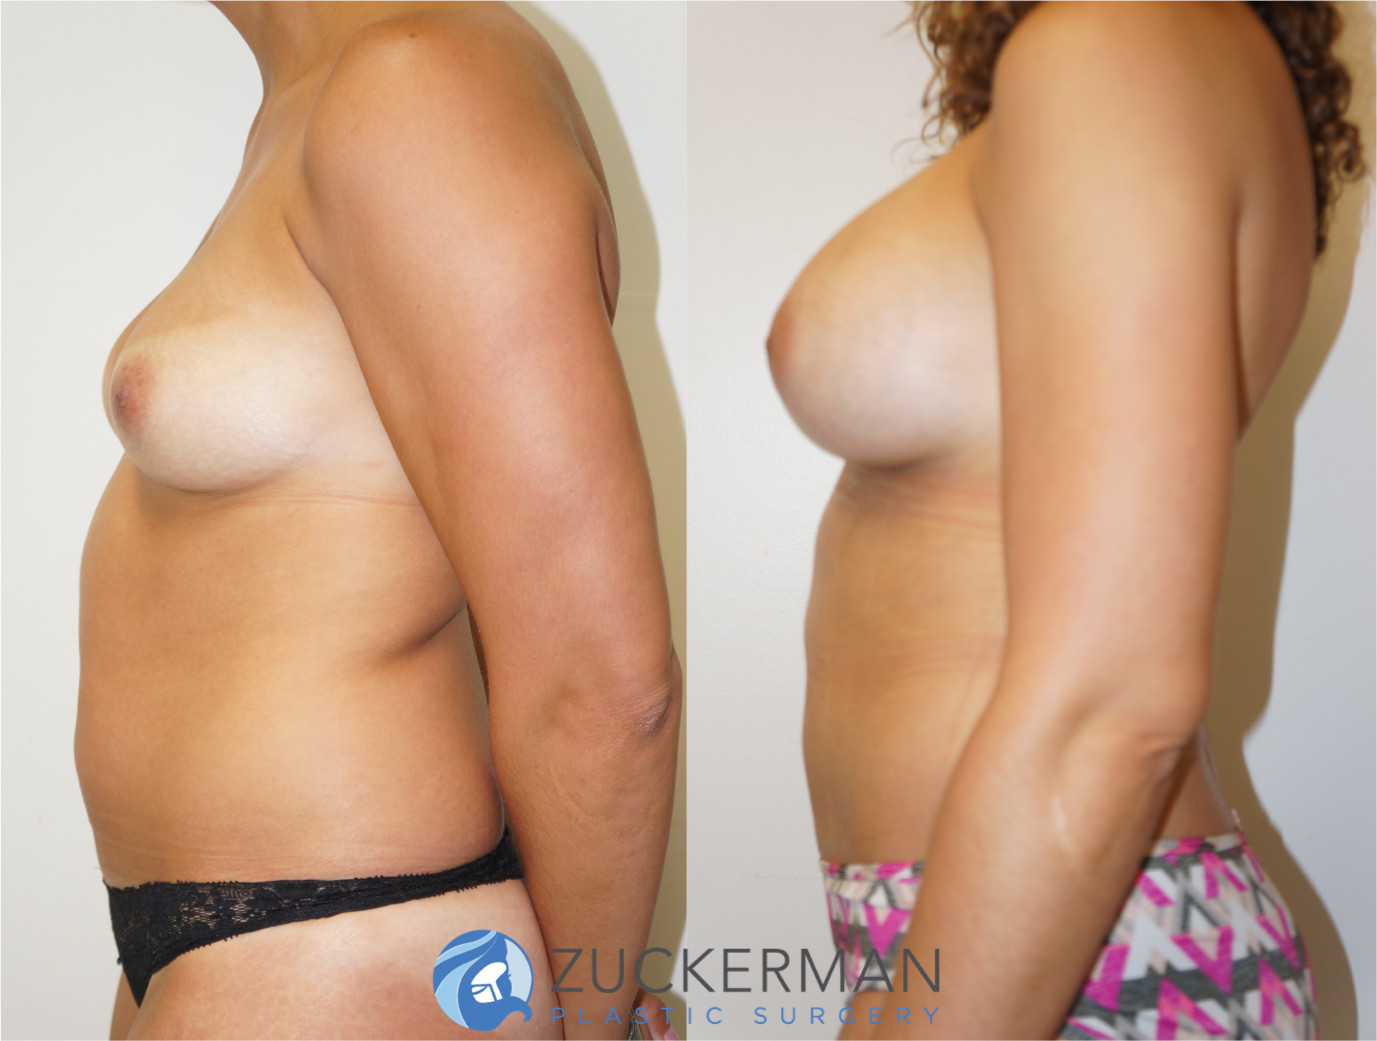 mommy makeover, before and after, breast augmentation, tummy tuck, liposuction, 2, joshua zuckerman md, nyc, right profile view